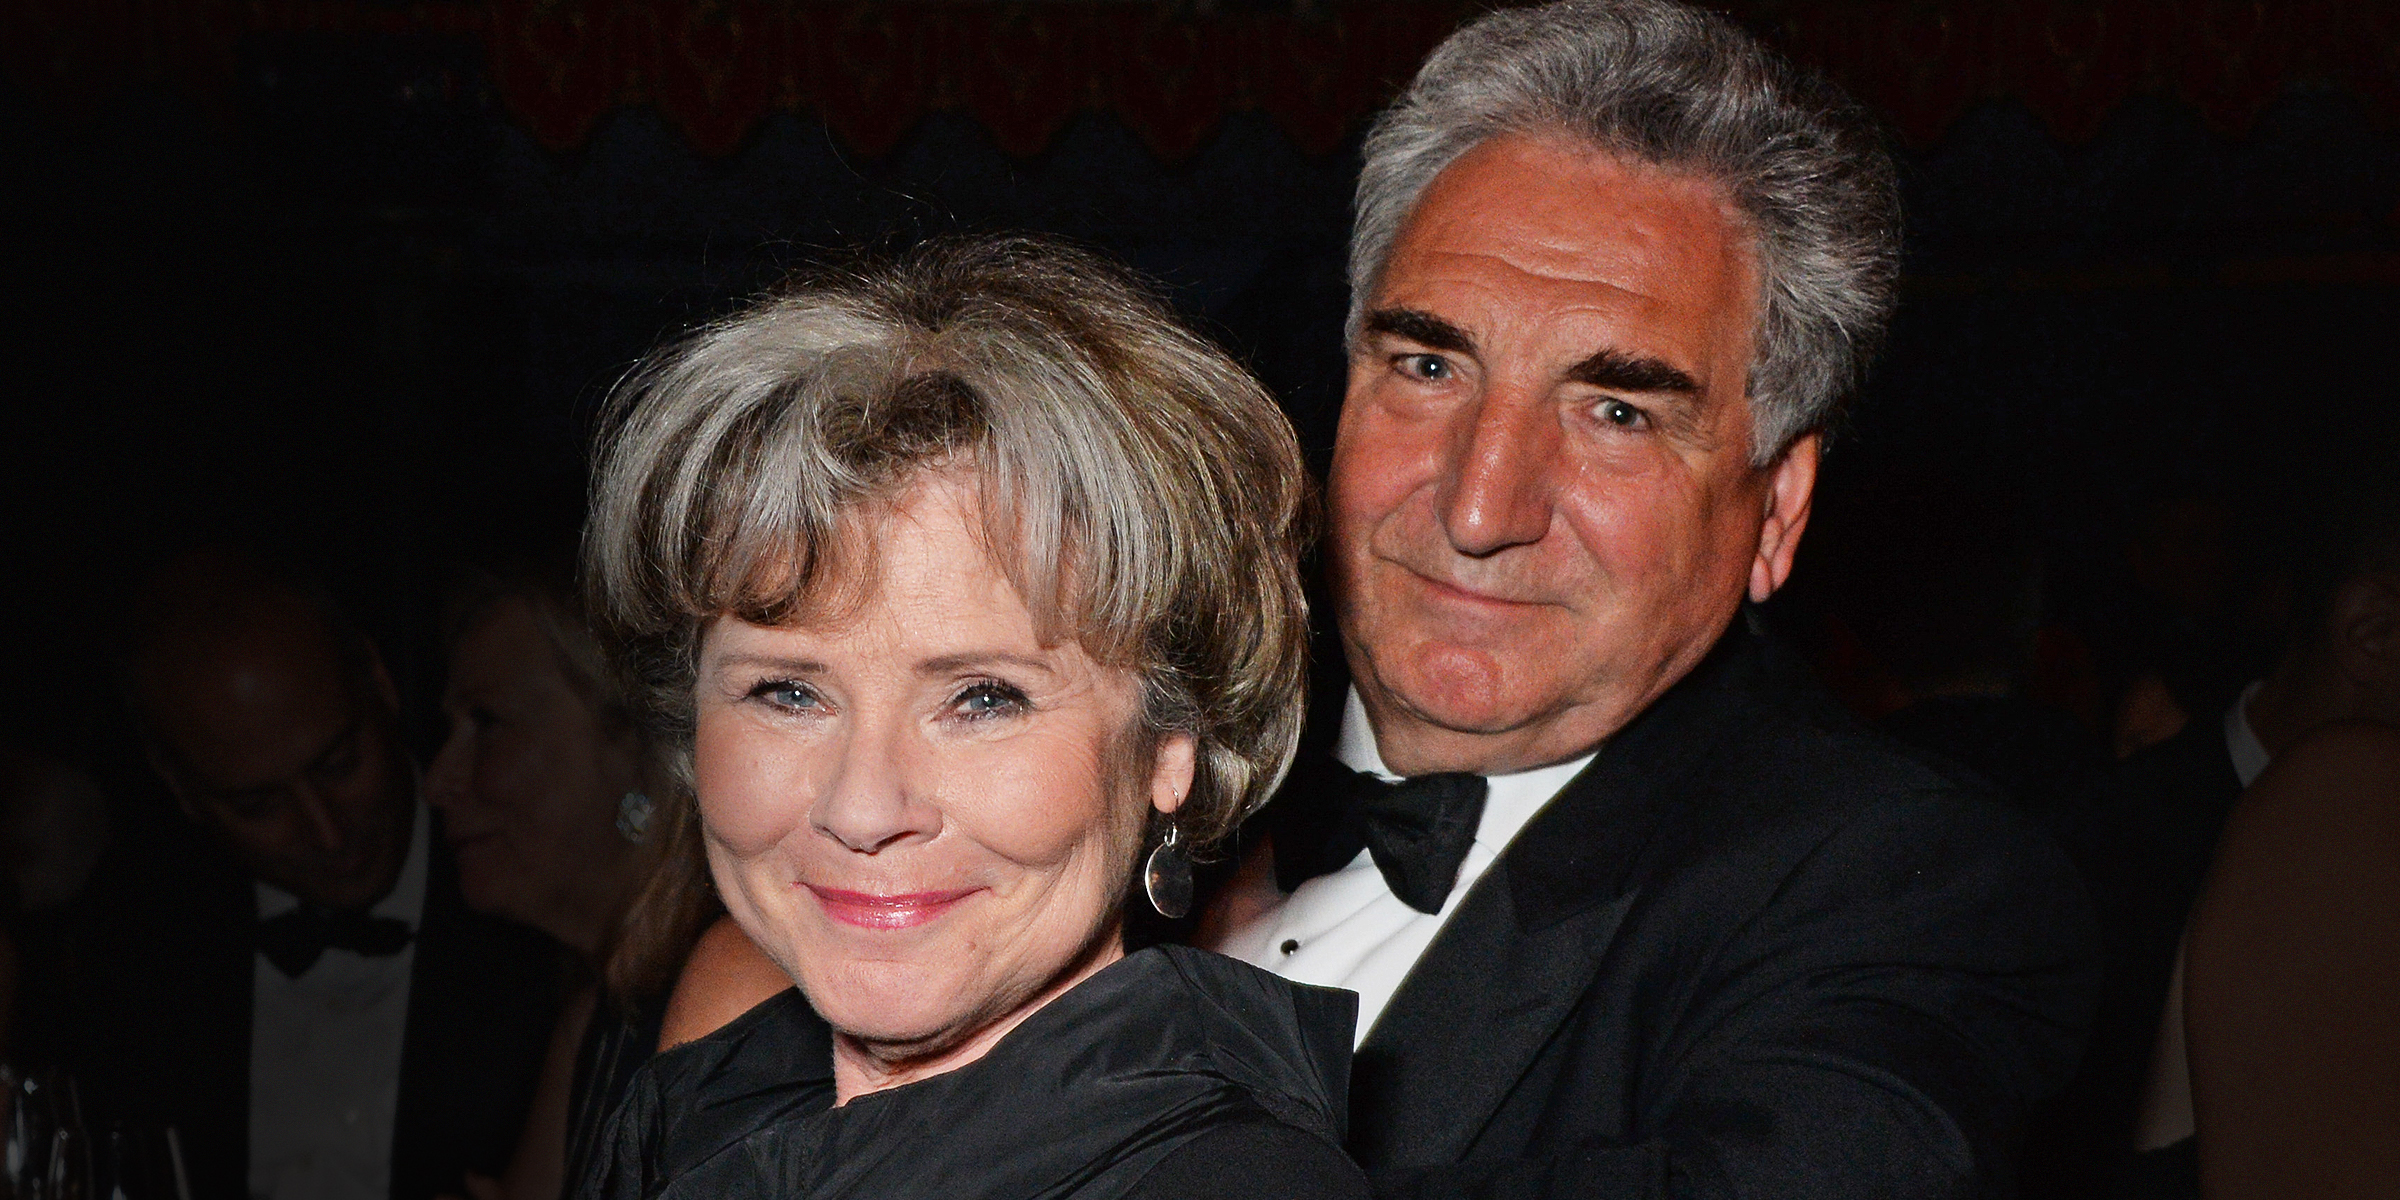 Imelda Staunton and Jim Carter | Source: Getty Images